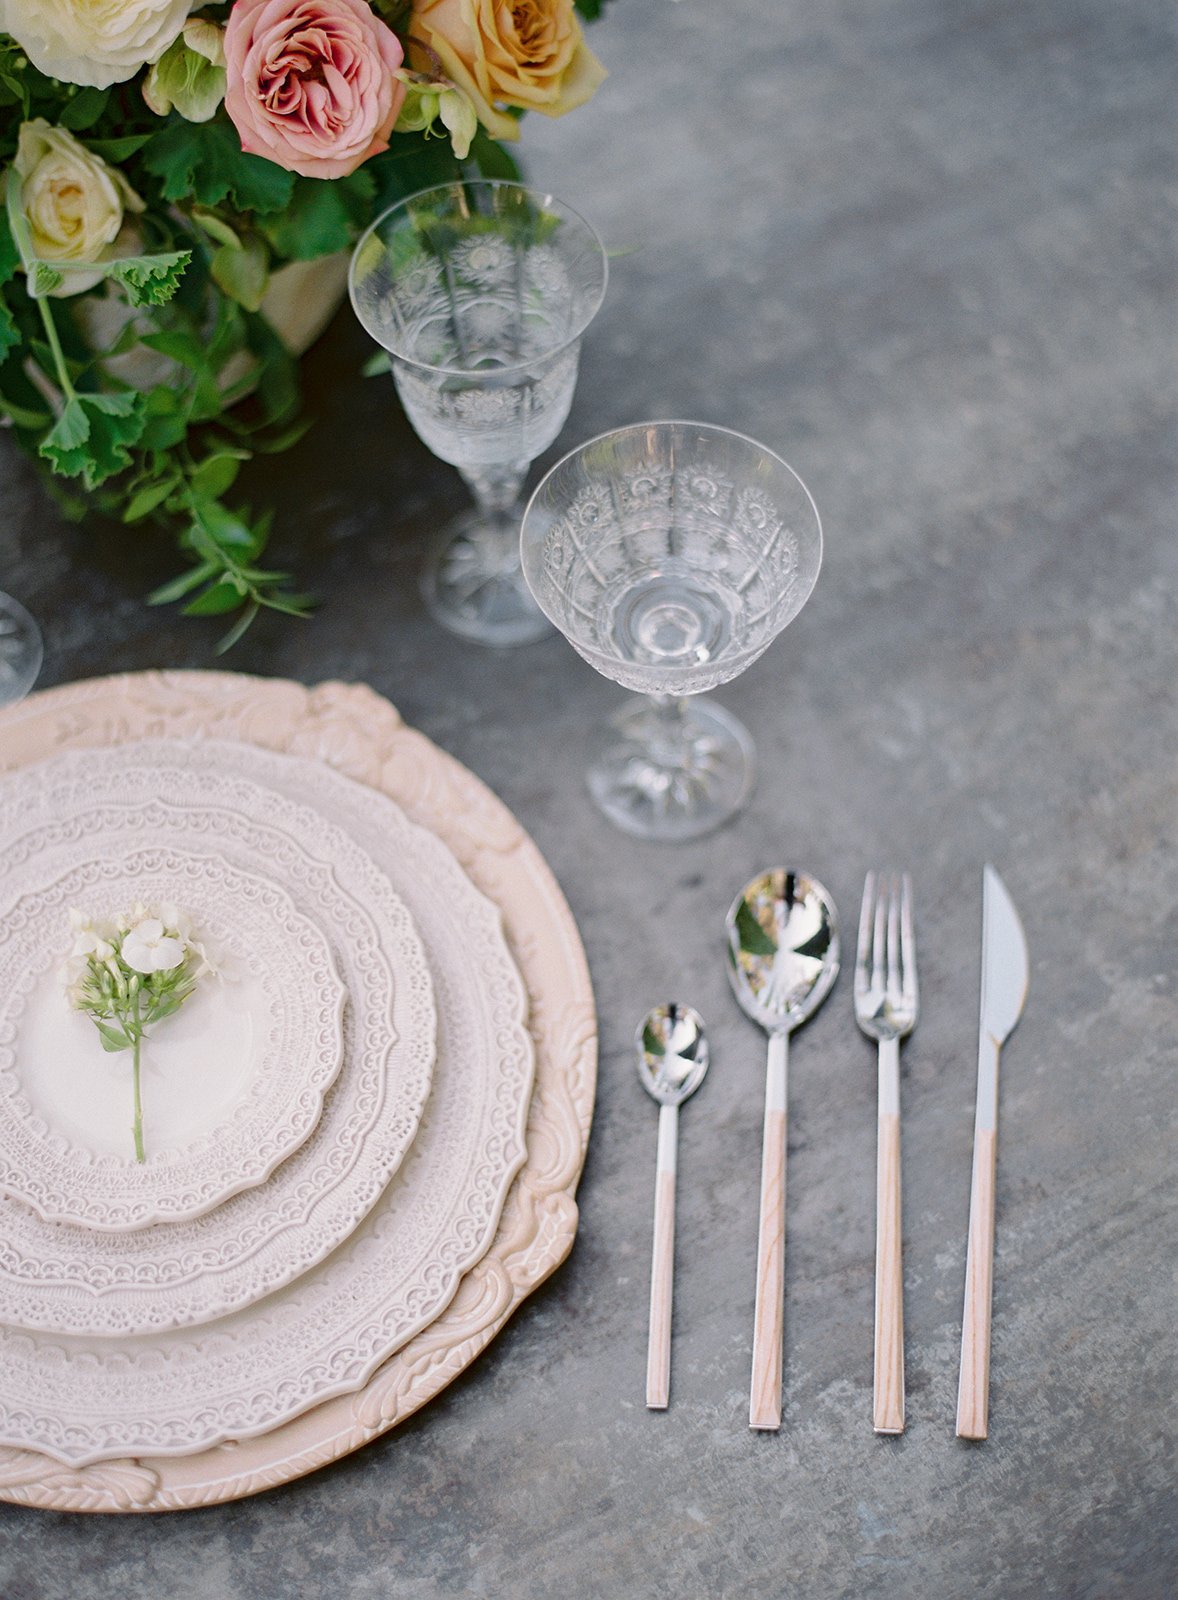 www.santabarbarawedding.com | Besame Floral | Carrie King Photography | Styled Shoot | Place Setting